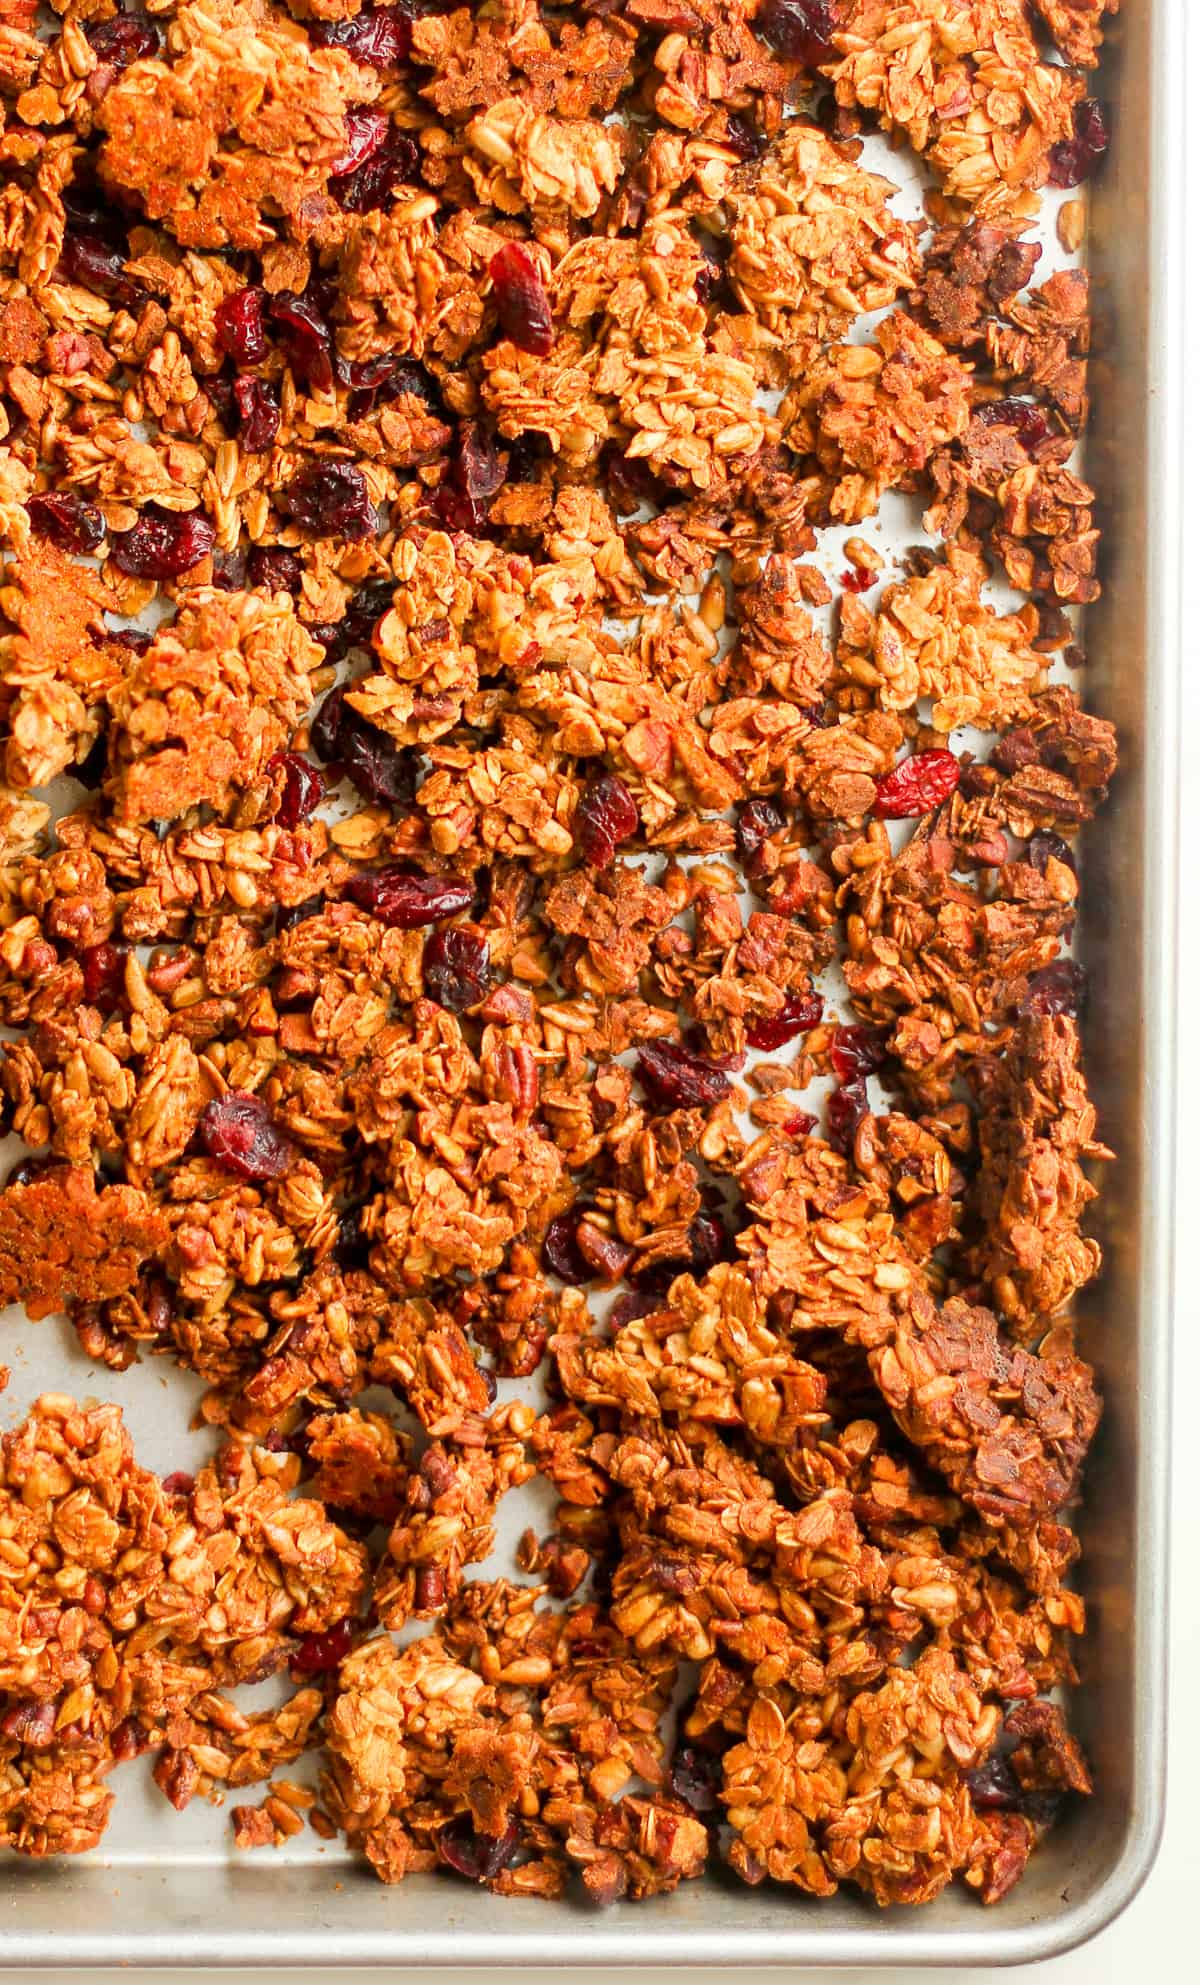 A corner of the sheet pan of just baked granola.